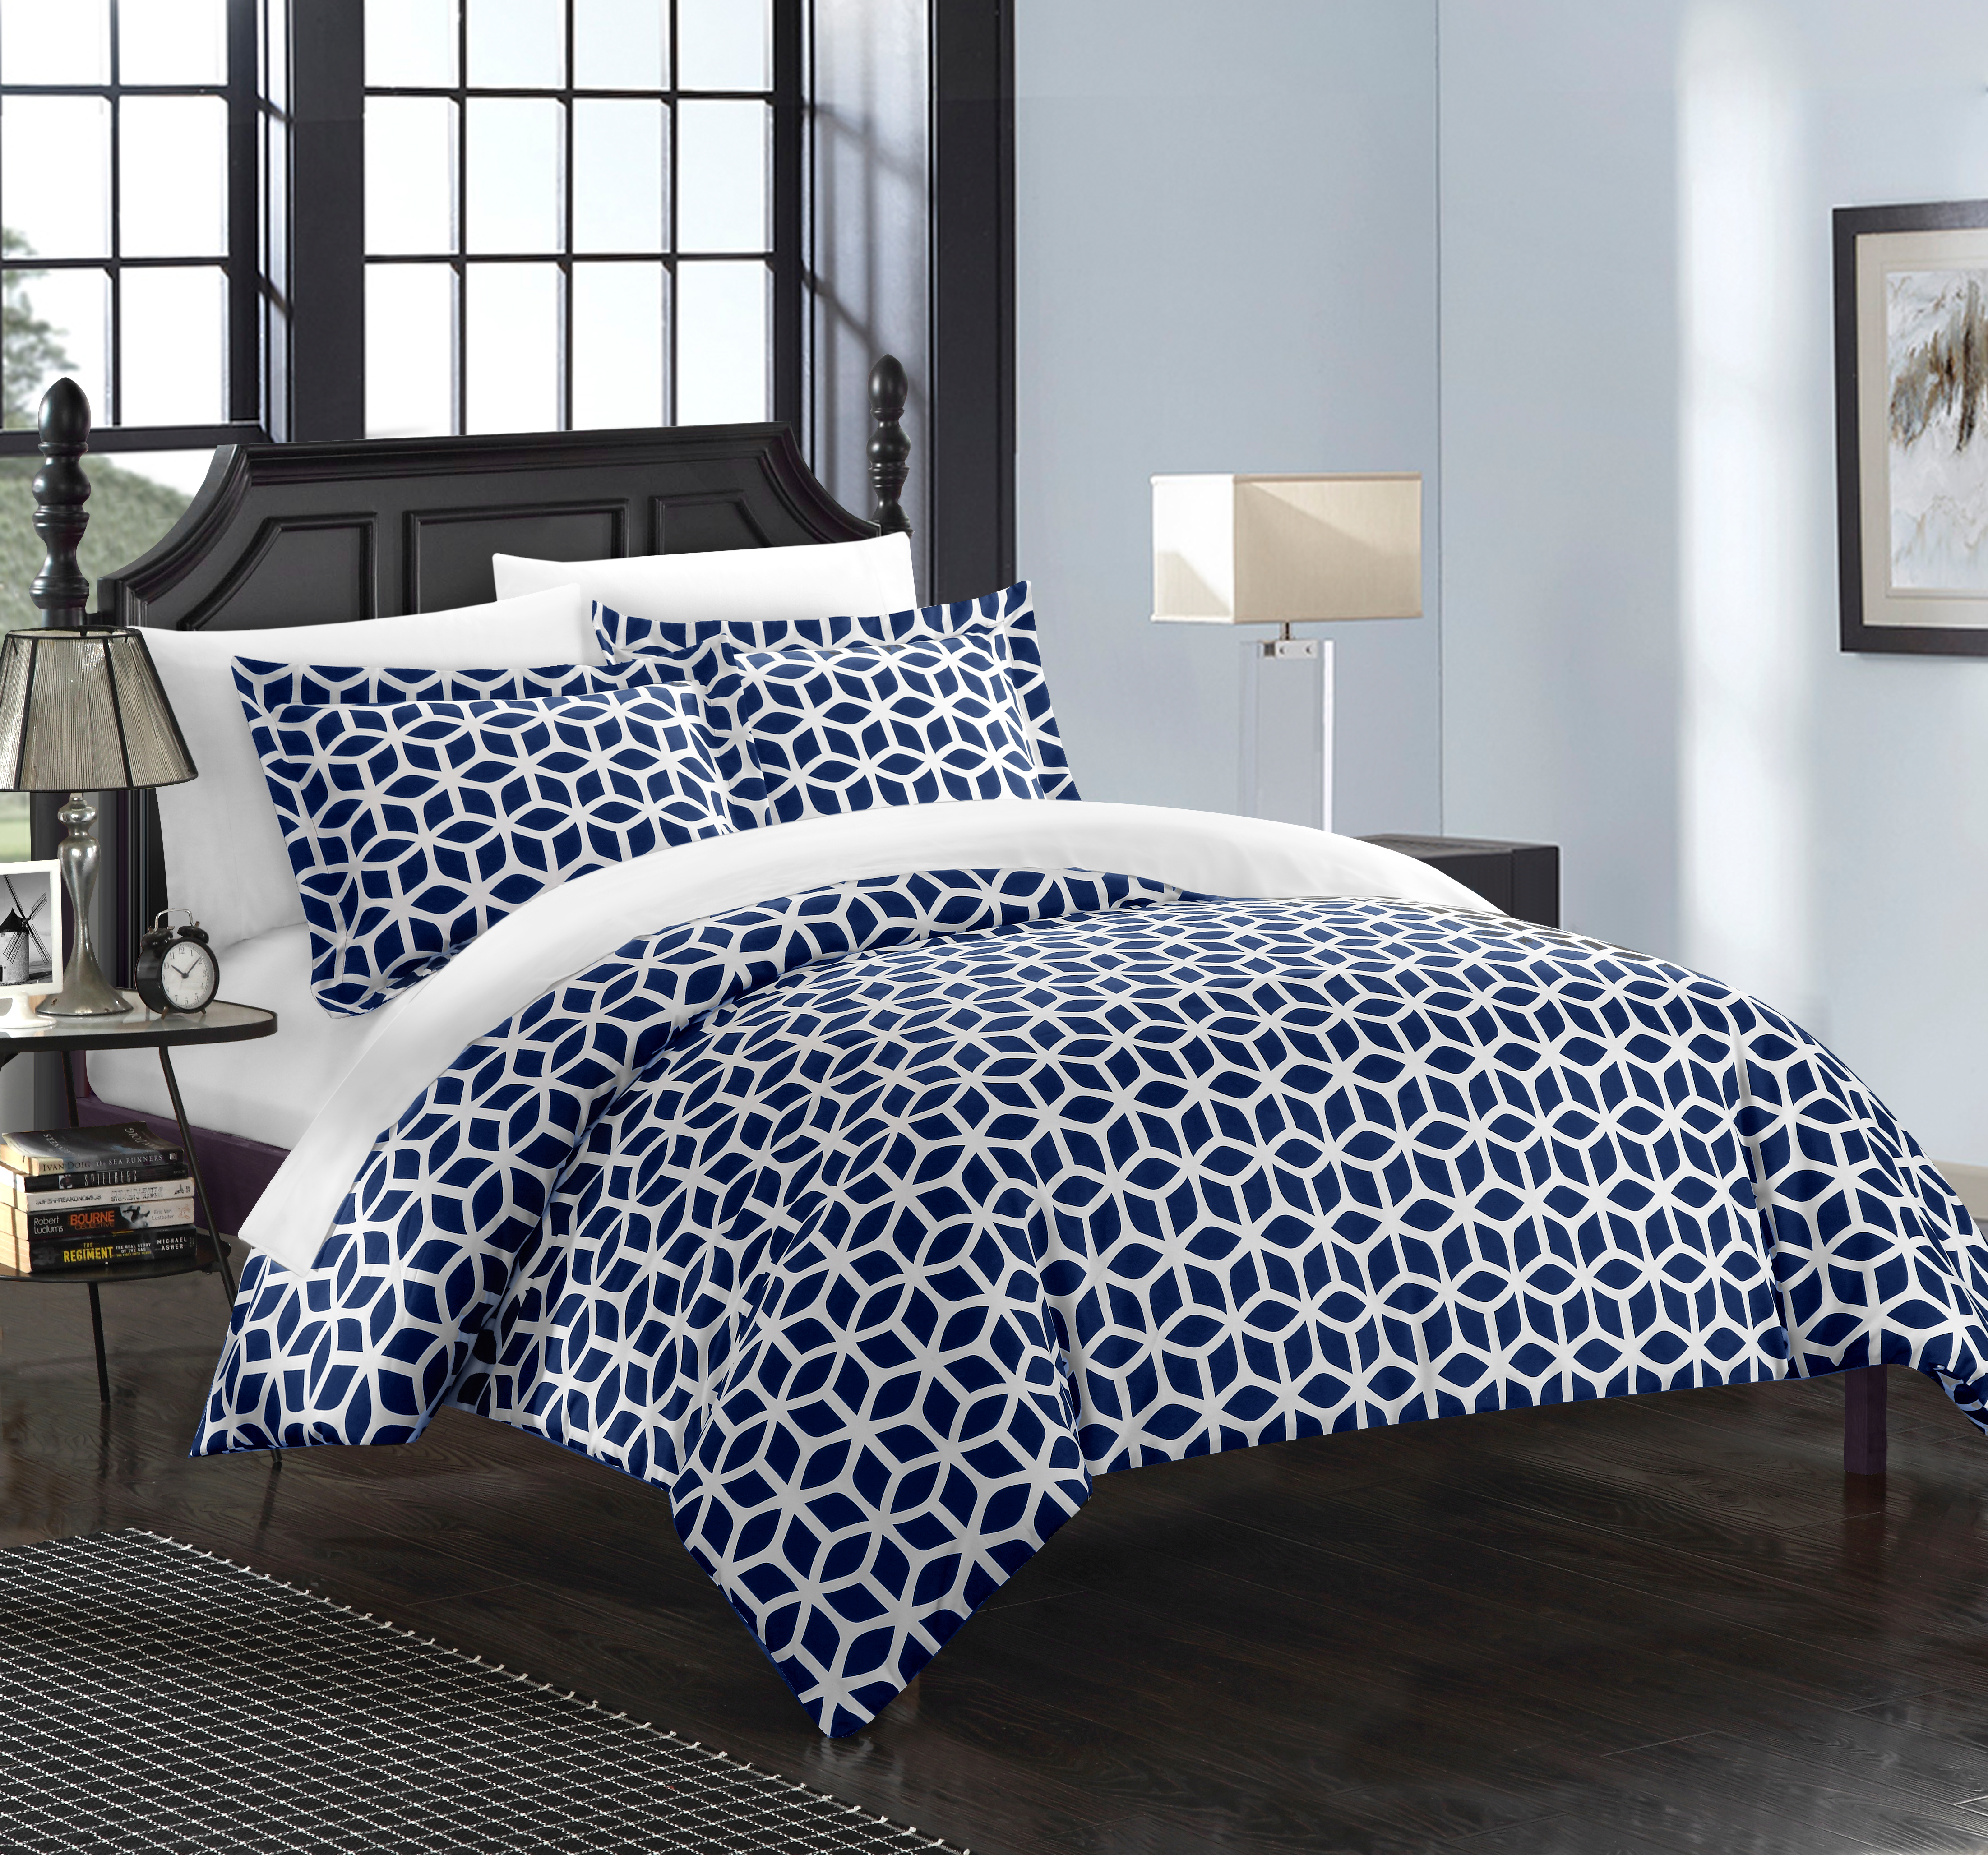 Chic Home Lovey 6 or 9 Piece Reversible Bed In a Bag Duvet Cover Set